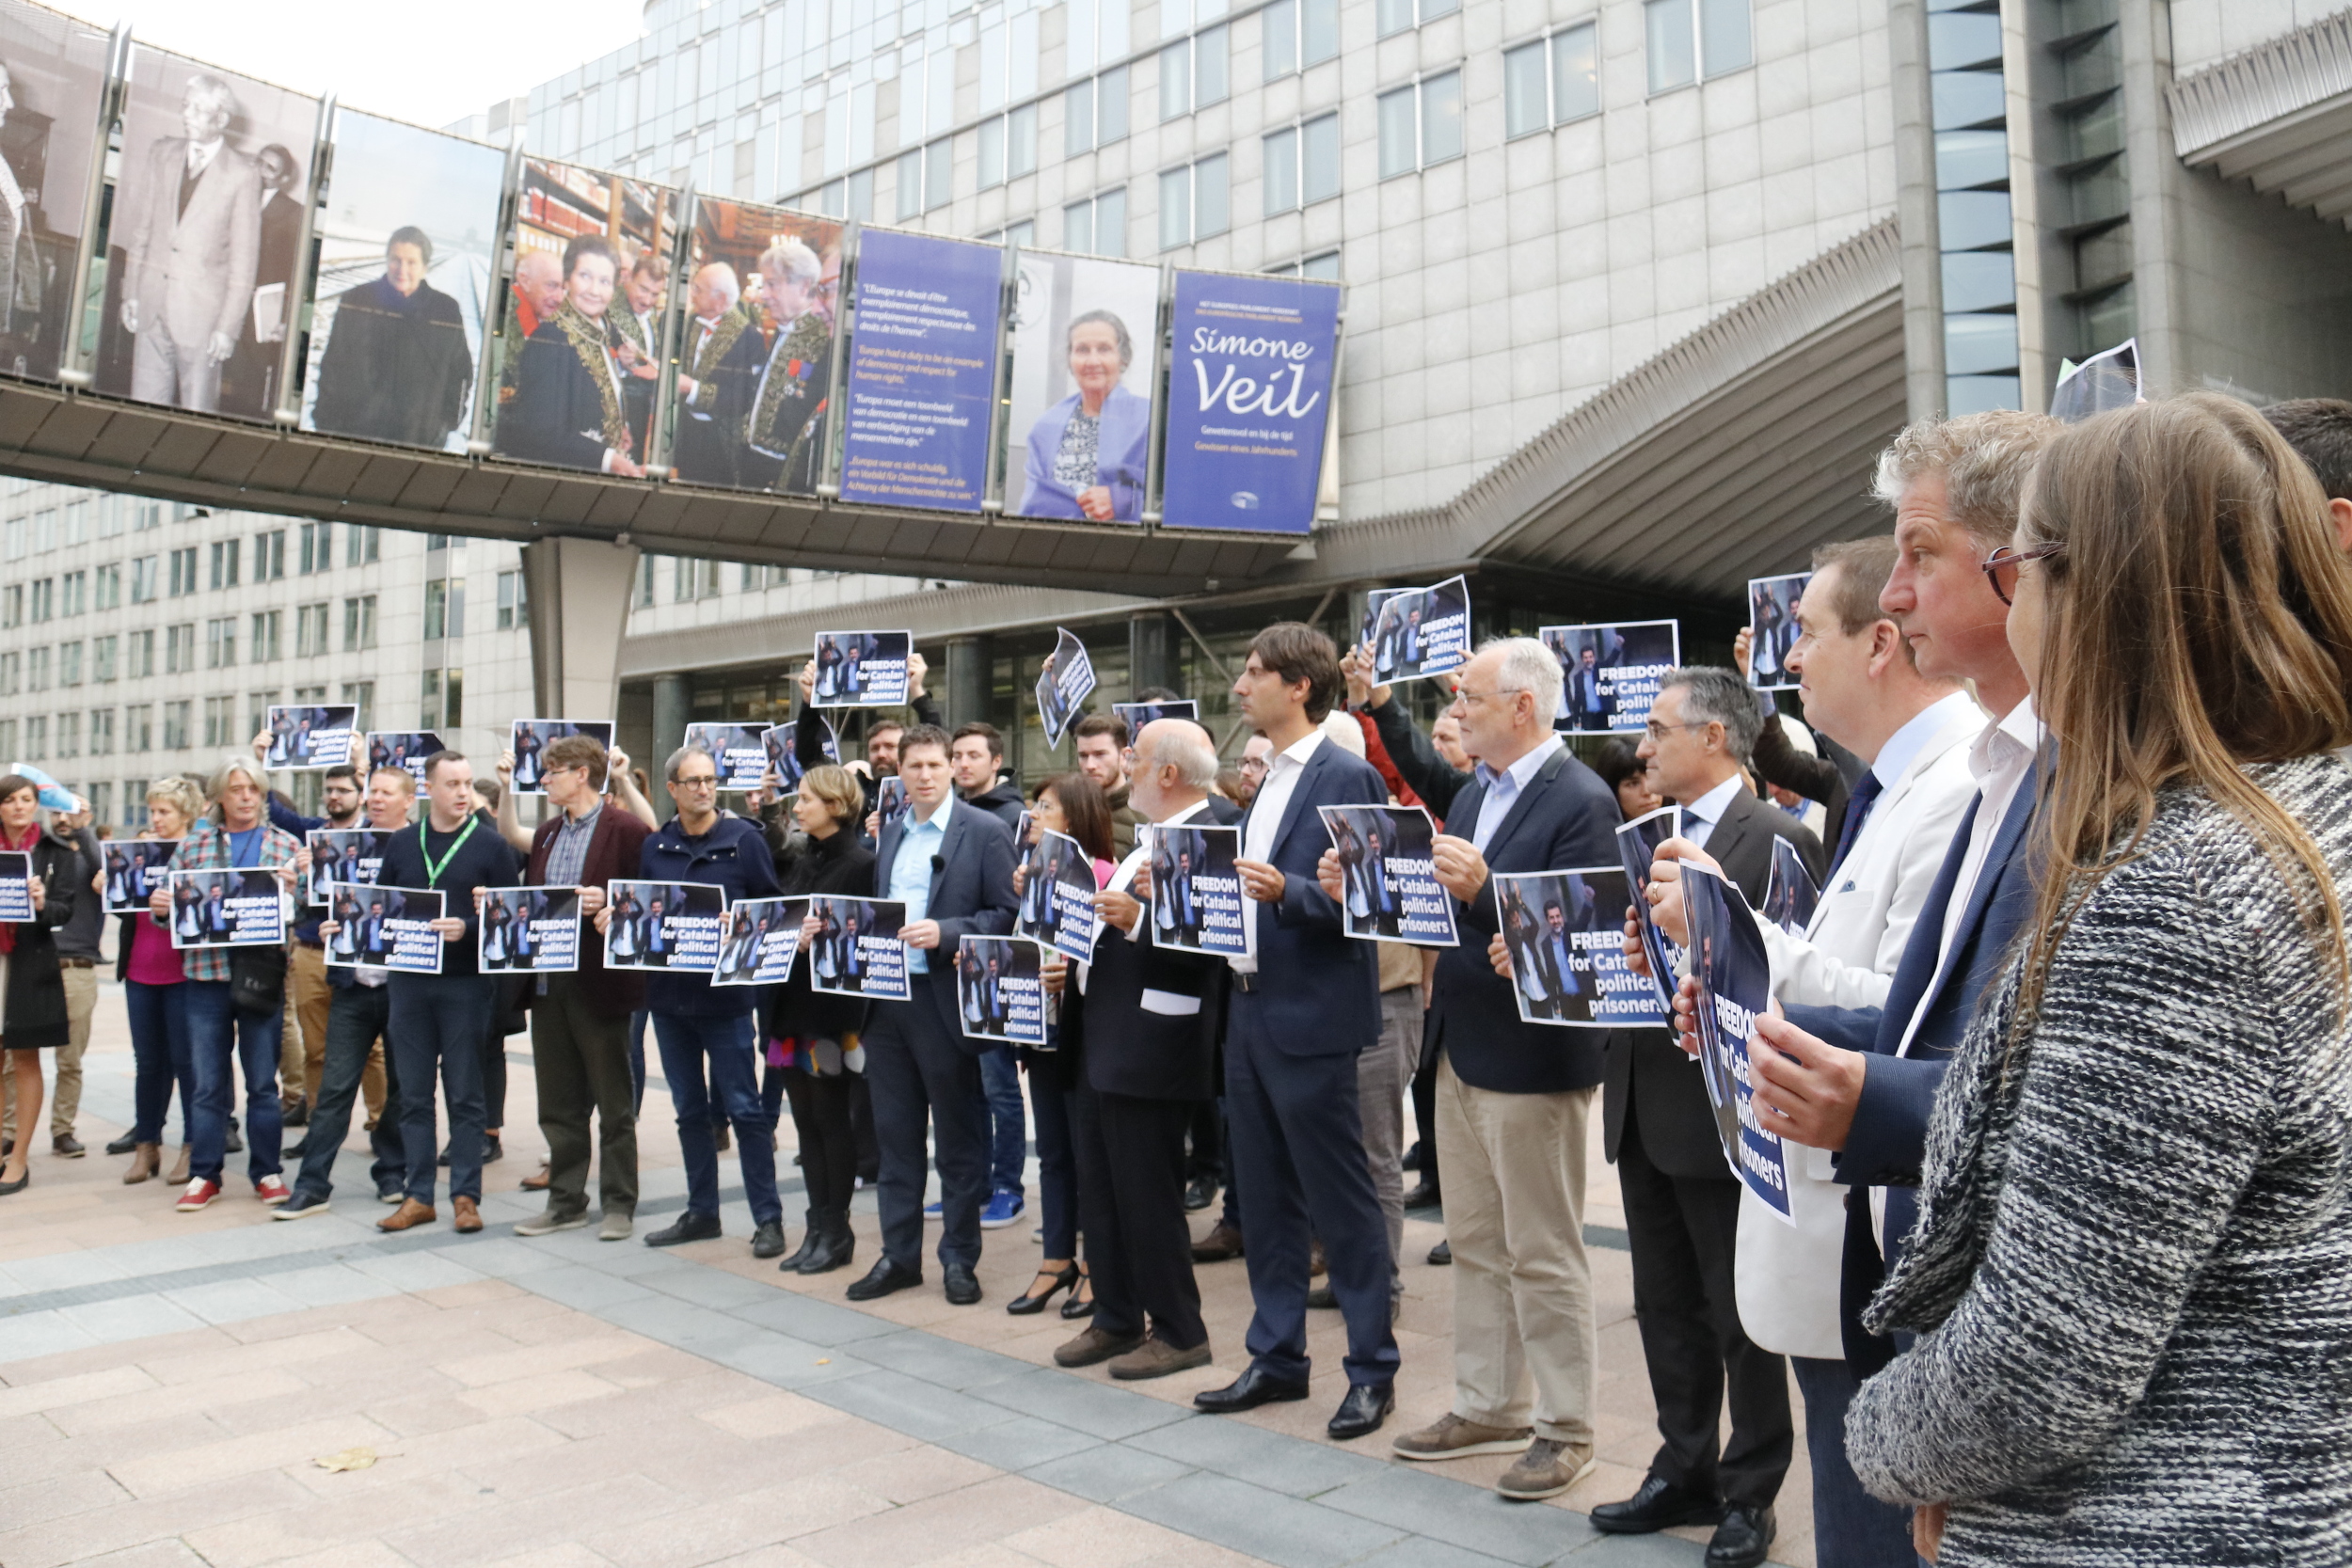 MEPs protest the incarceration of Jordi Sànchez and Jordi Cuixart in front of the European Parliament in Brussels